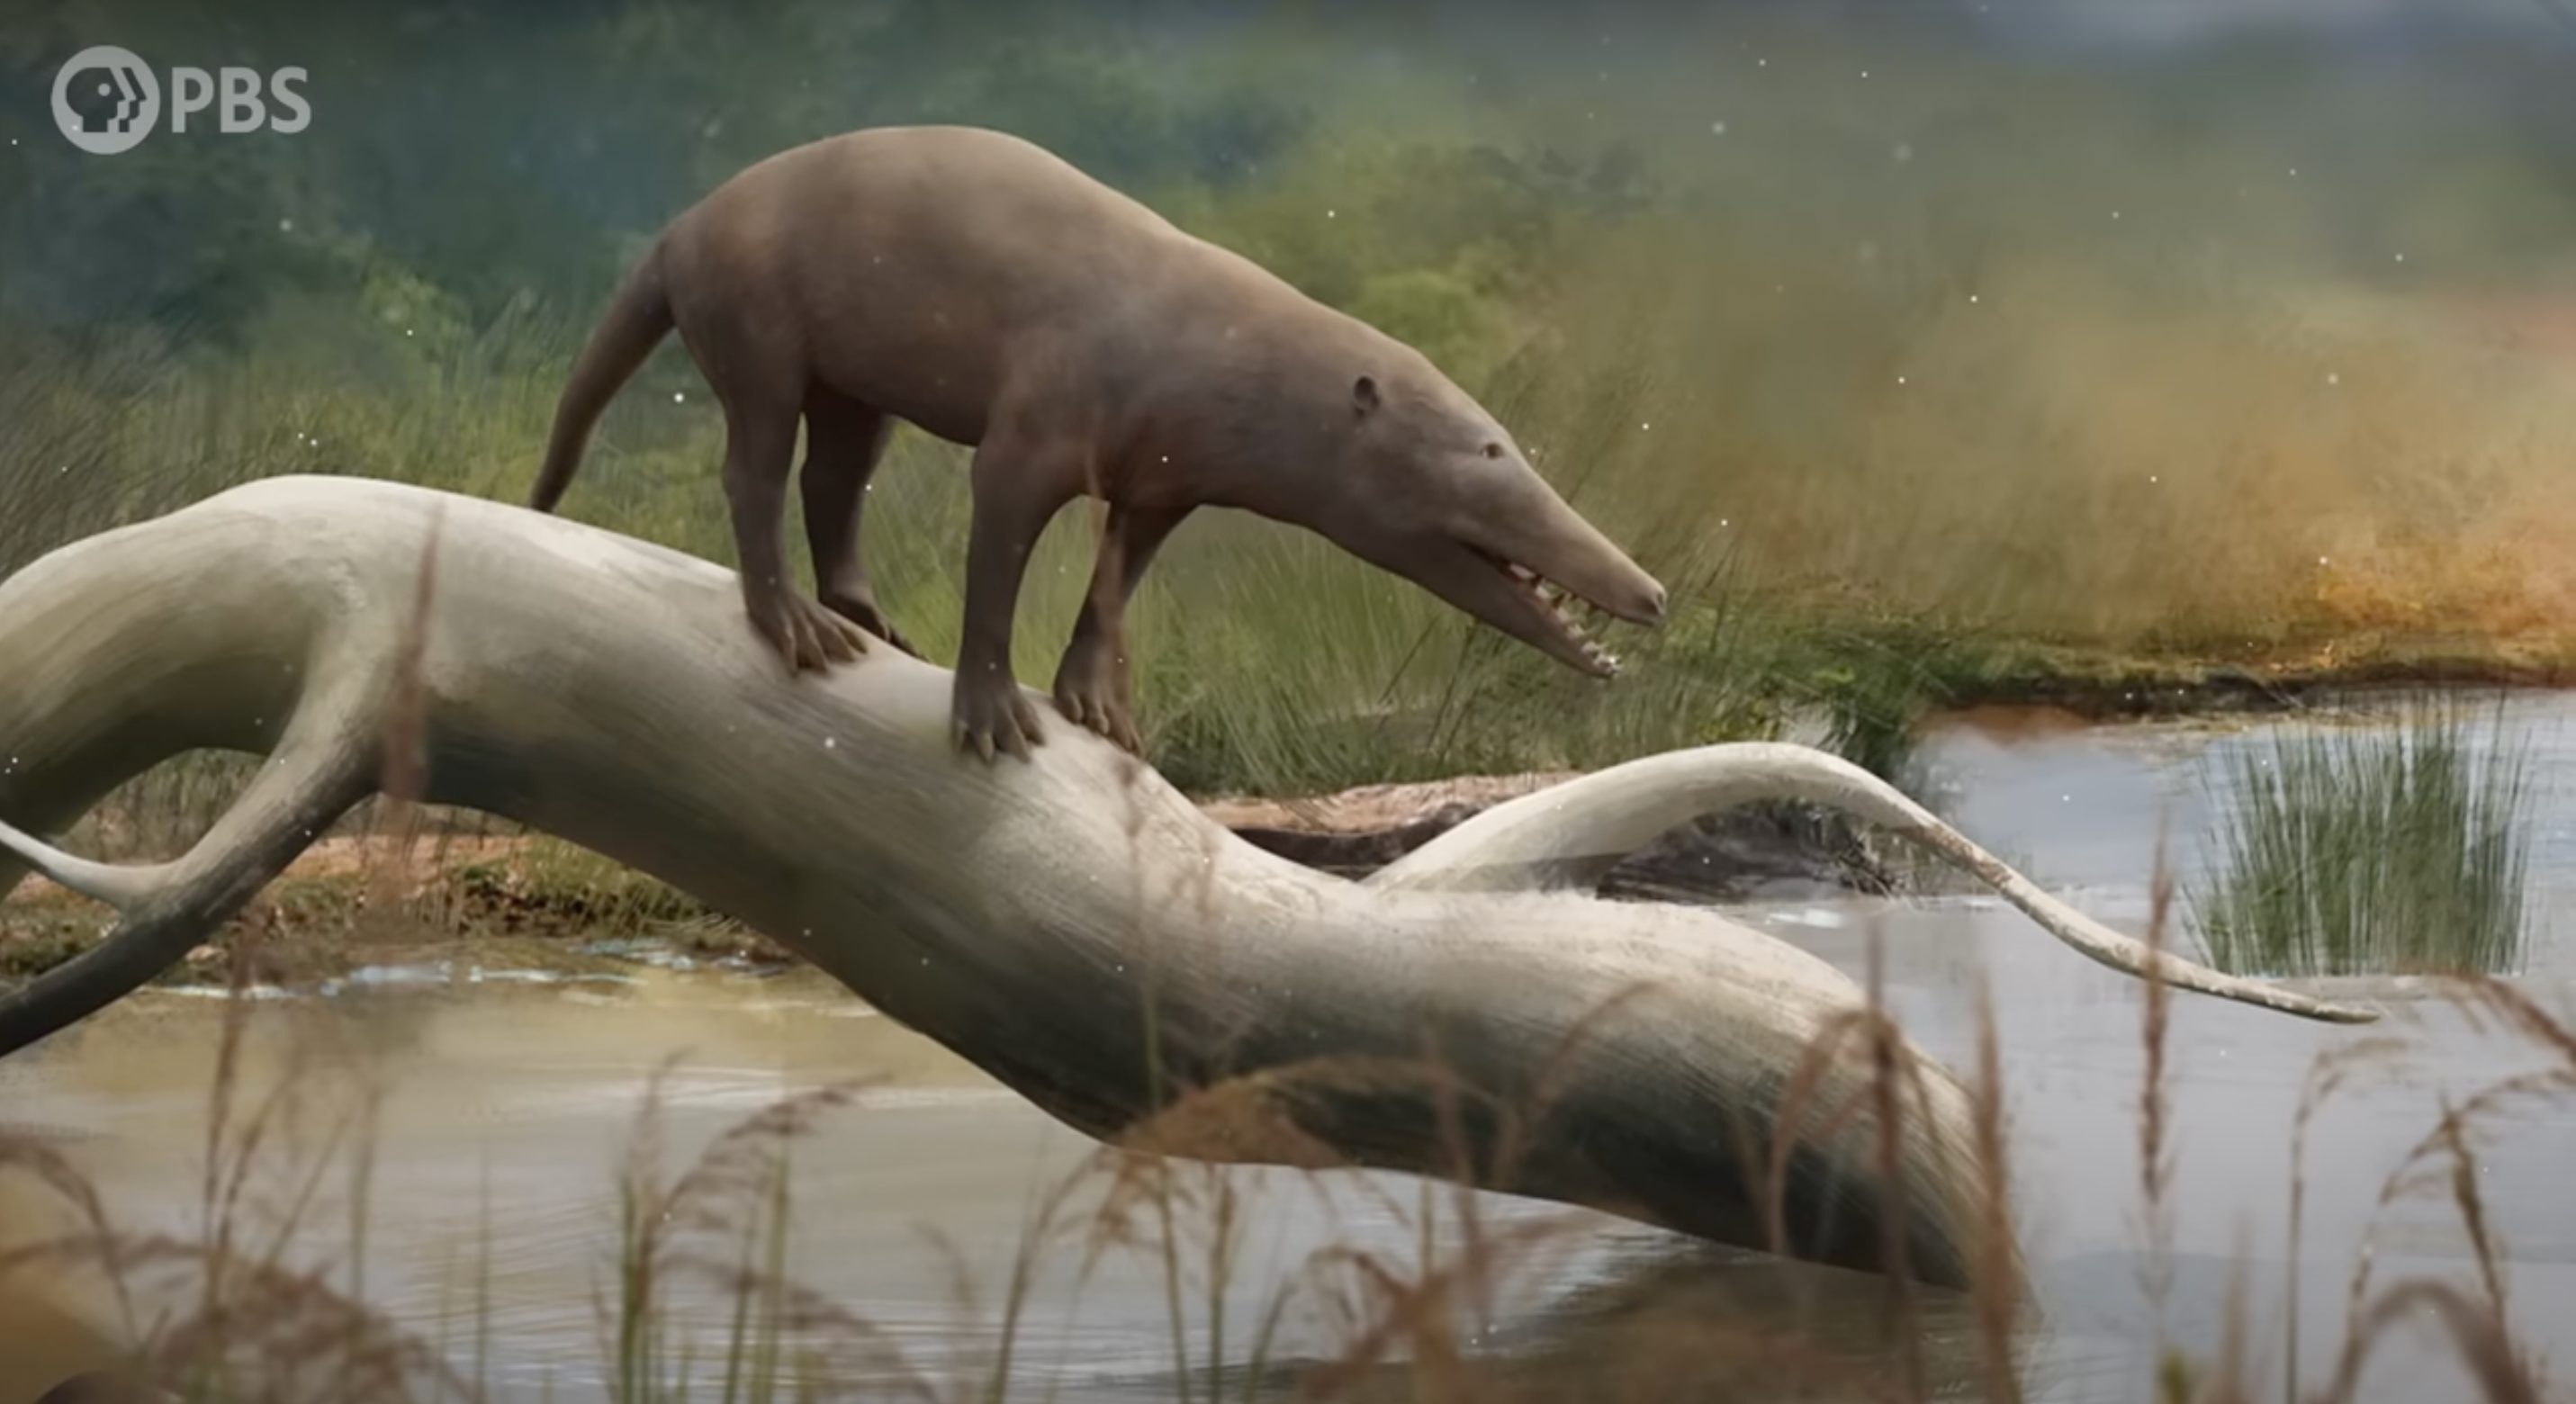 PBS video shows how wolves evolved from whales